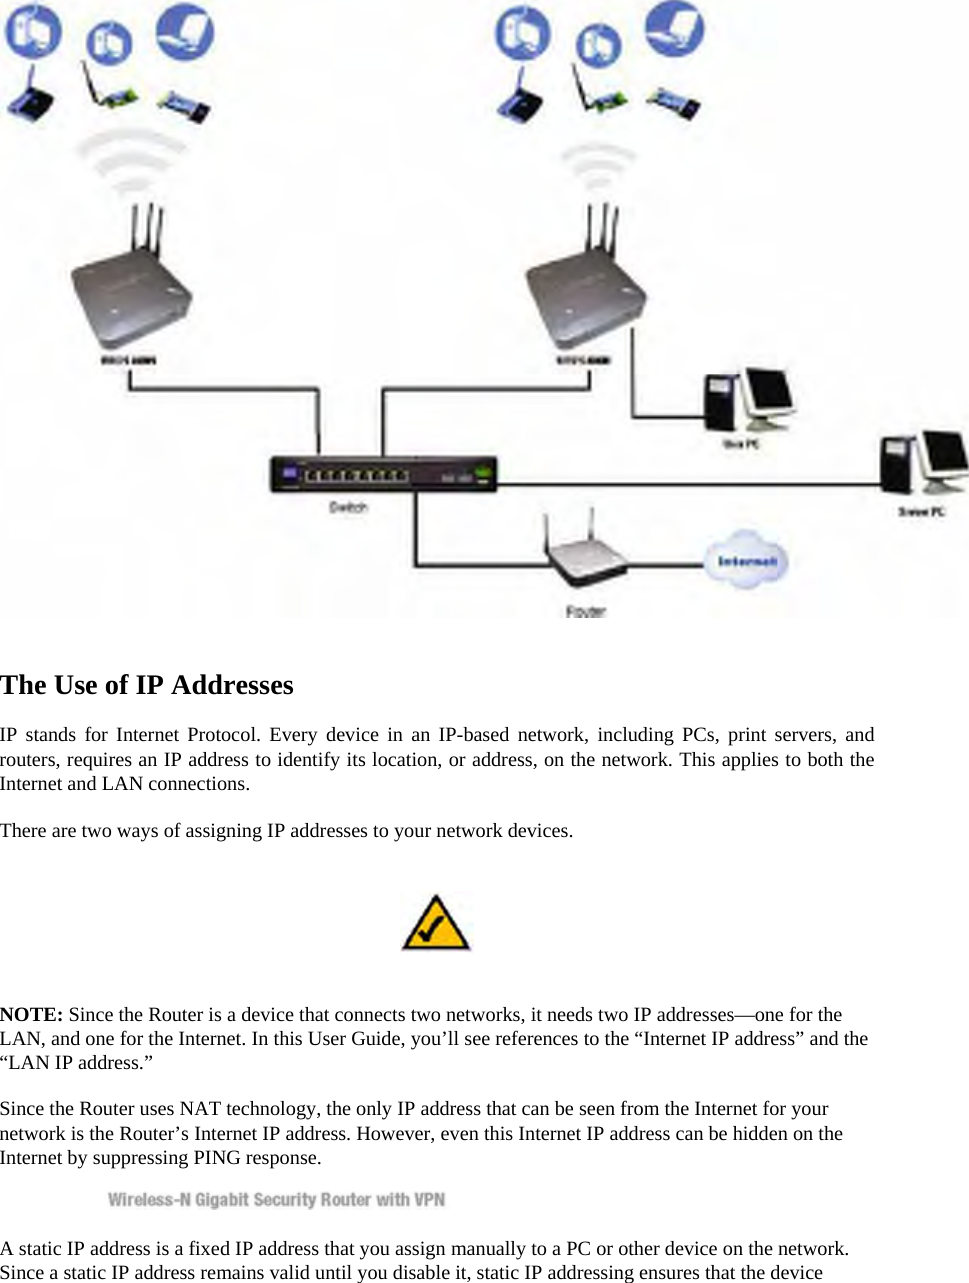  The Use of IP Addresses   IP stands for Internet Protocol. Every device in an IP-based network, including PCs, print servers, and routers, requires an IP address to identify its location, or address, on the network. This applies to both the Internet and LAN connections.   There are two ways of assigning IP addresses to your network devices.    NOTE: Since the Router is a device that connects two networks, it needs two IP addresses—one for the LAN, and one for the Internet. In this User Guide, you’ll see references to the “Internet IP address” and the “LAN IP address.”   Since the Router uses NAT technology, the only IP address that can be seen from the Internet for your network is the Router’s Internet IP address. However, even this Internet IP address can be hidden on the Internet by suppressing PING response.   A static IP address is a fixed IP address that you assign manually to a PC or other device on the network. Since a static IP address remains valid until you disable it, static IP addressing ensures that the device 